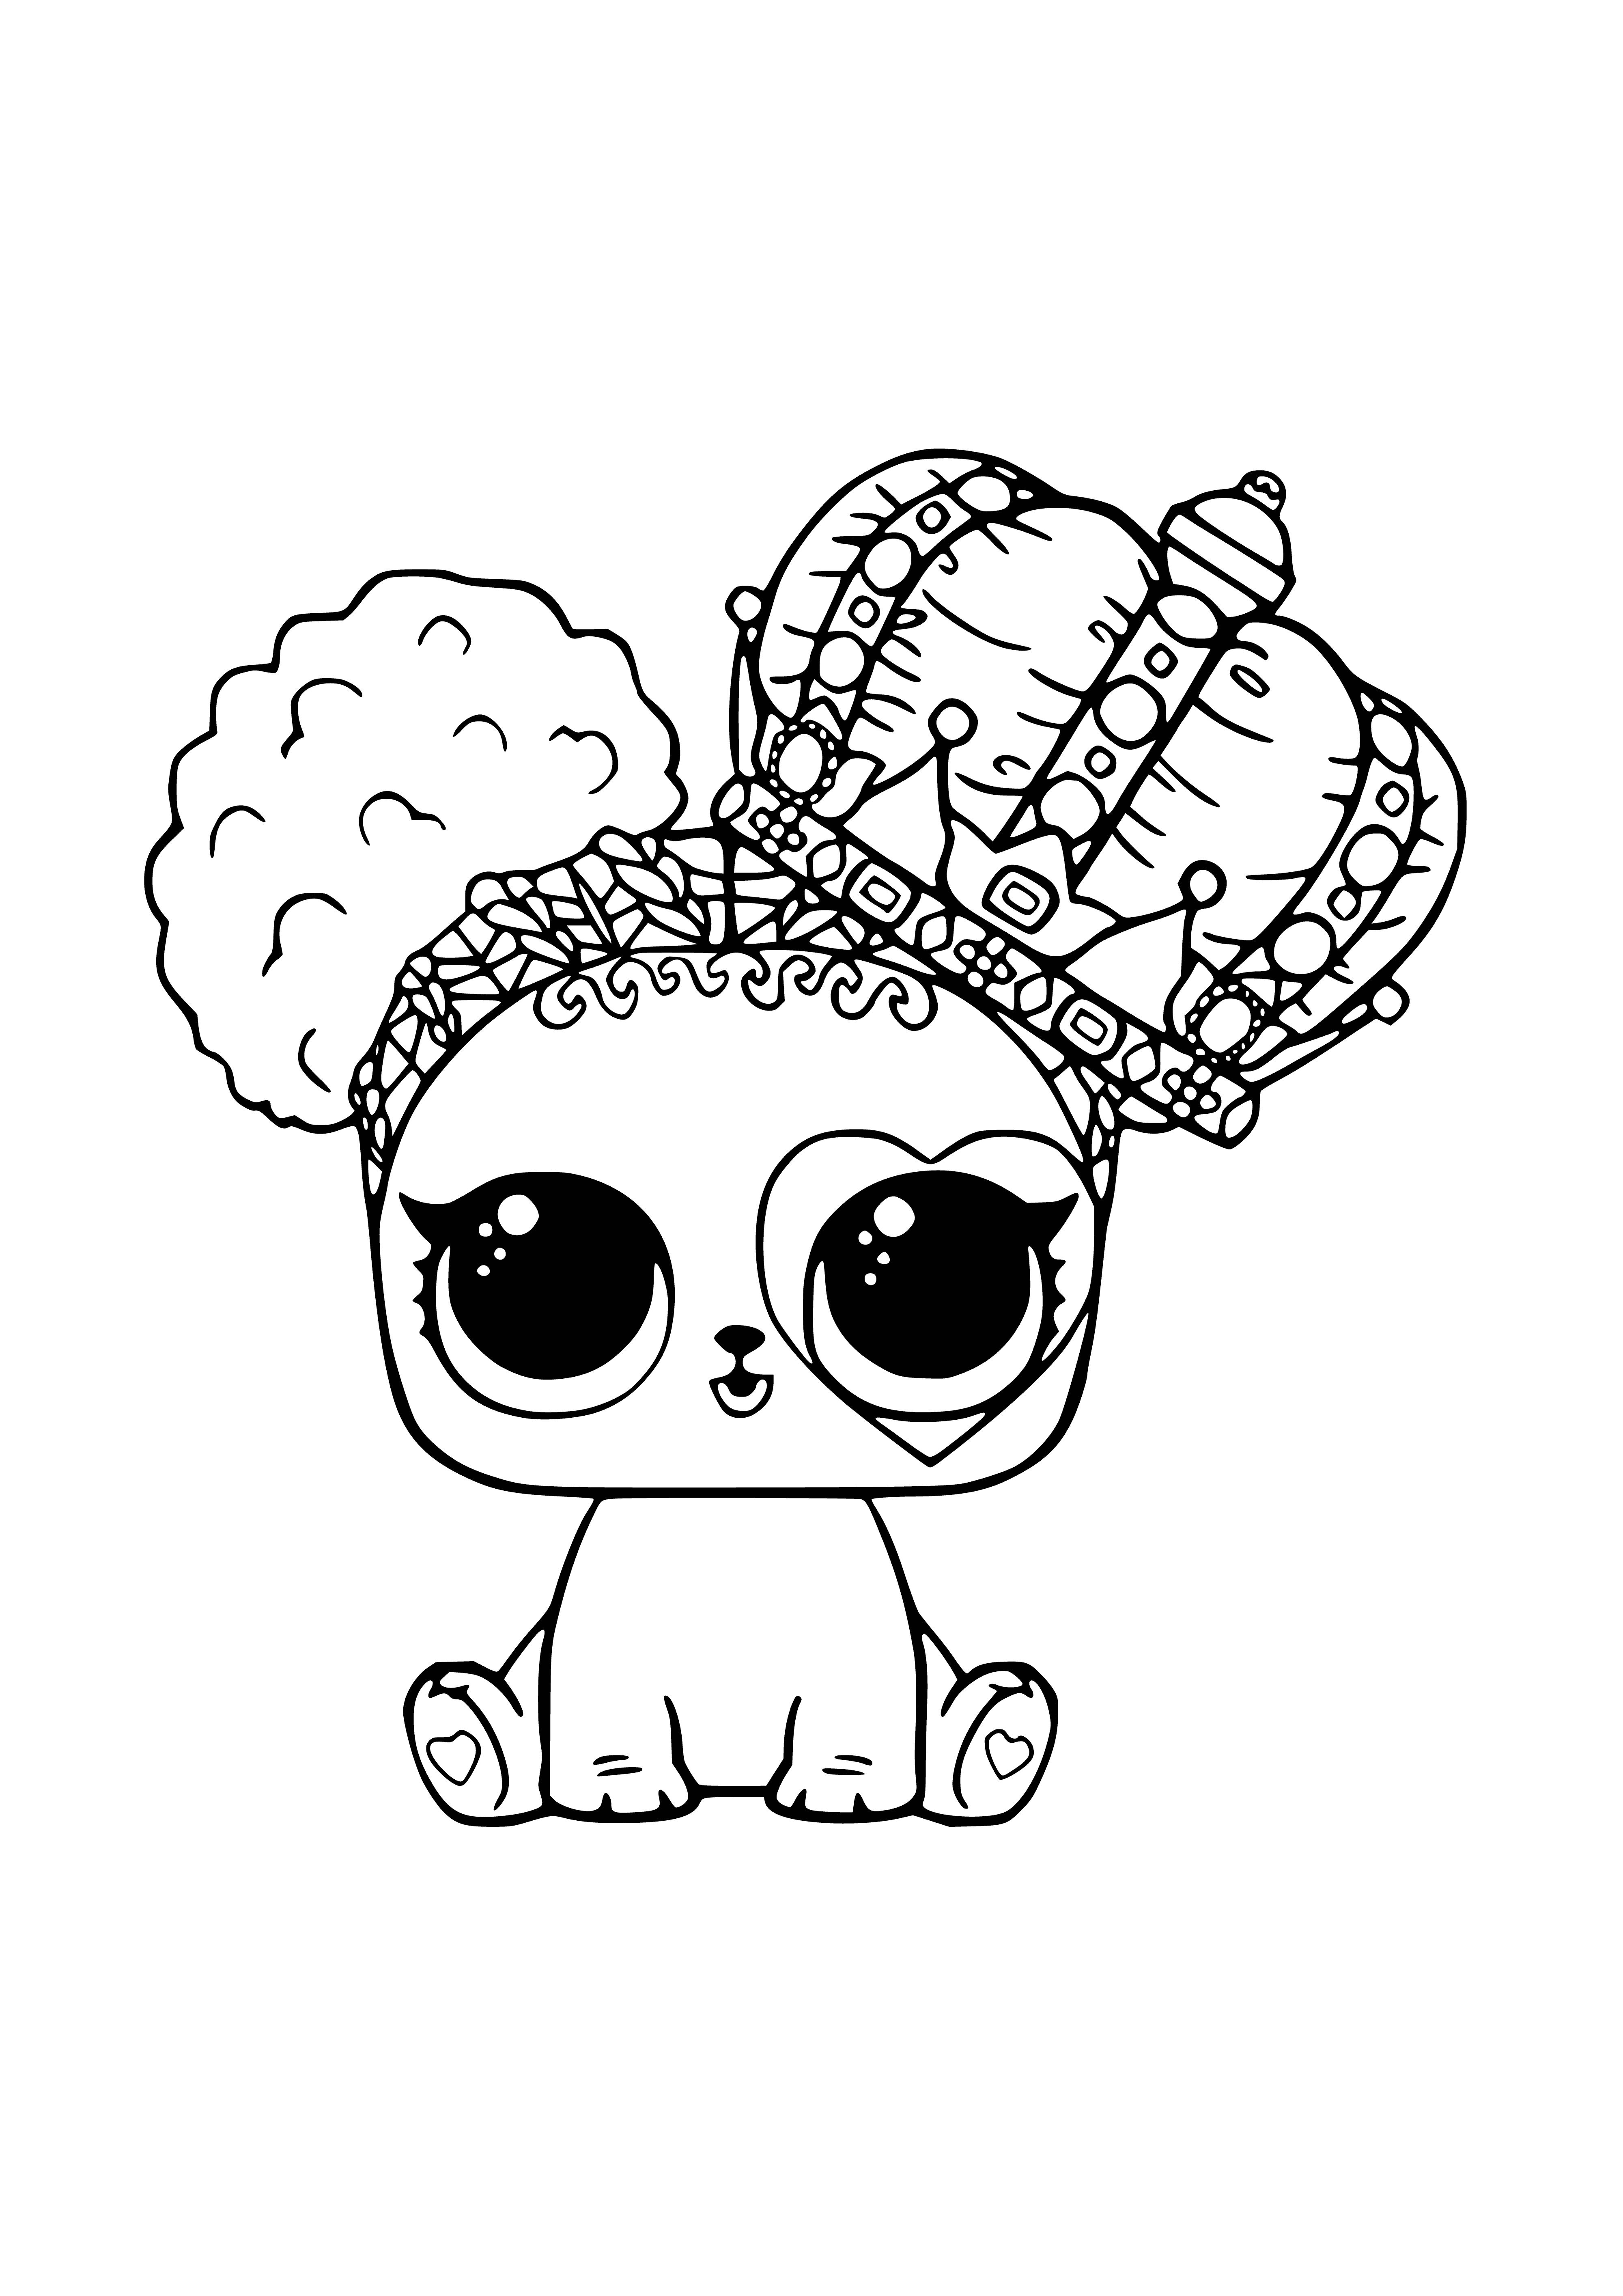 coloring page: A small puppy is looking at the camera, its head tilted to one side and its big brown eyes full of love. It has a pink heart drawn on its left cheek.